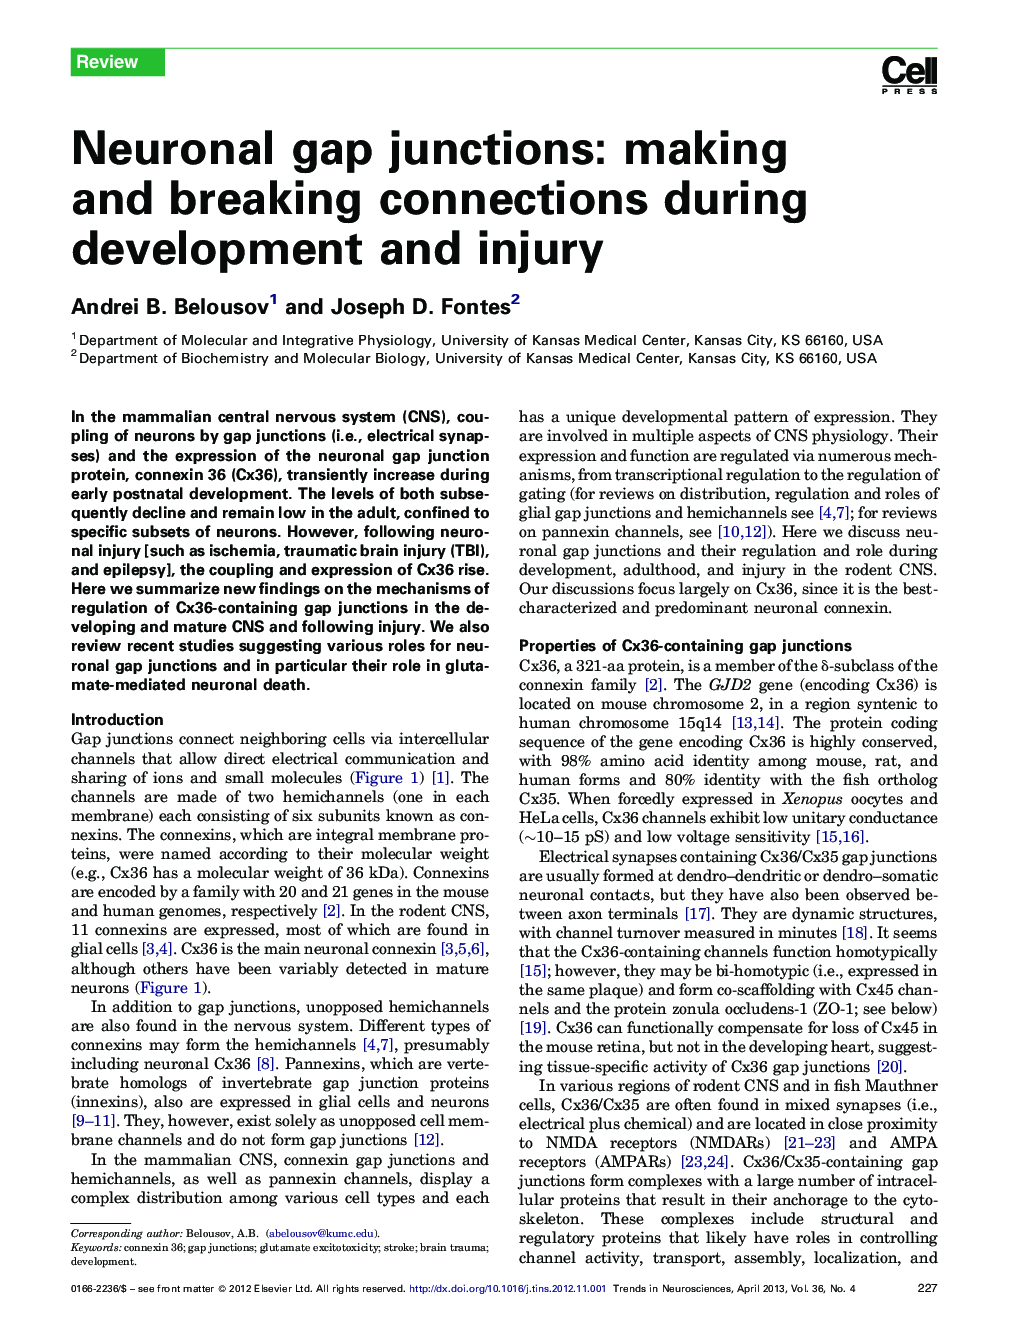 Neuronal gap junctions: making and breaking connections during development and injury